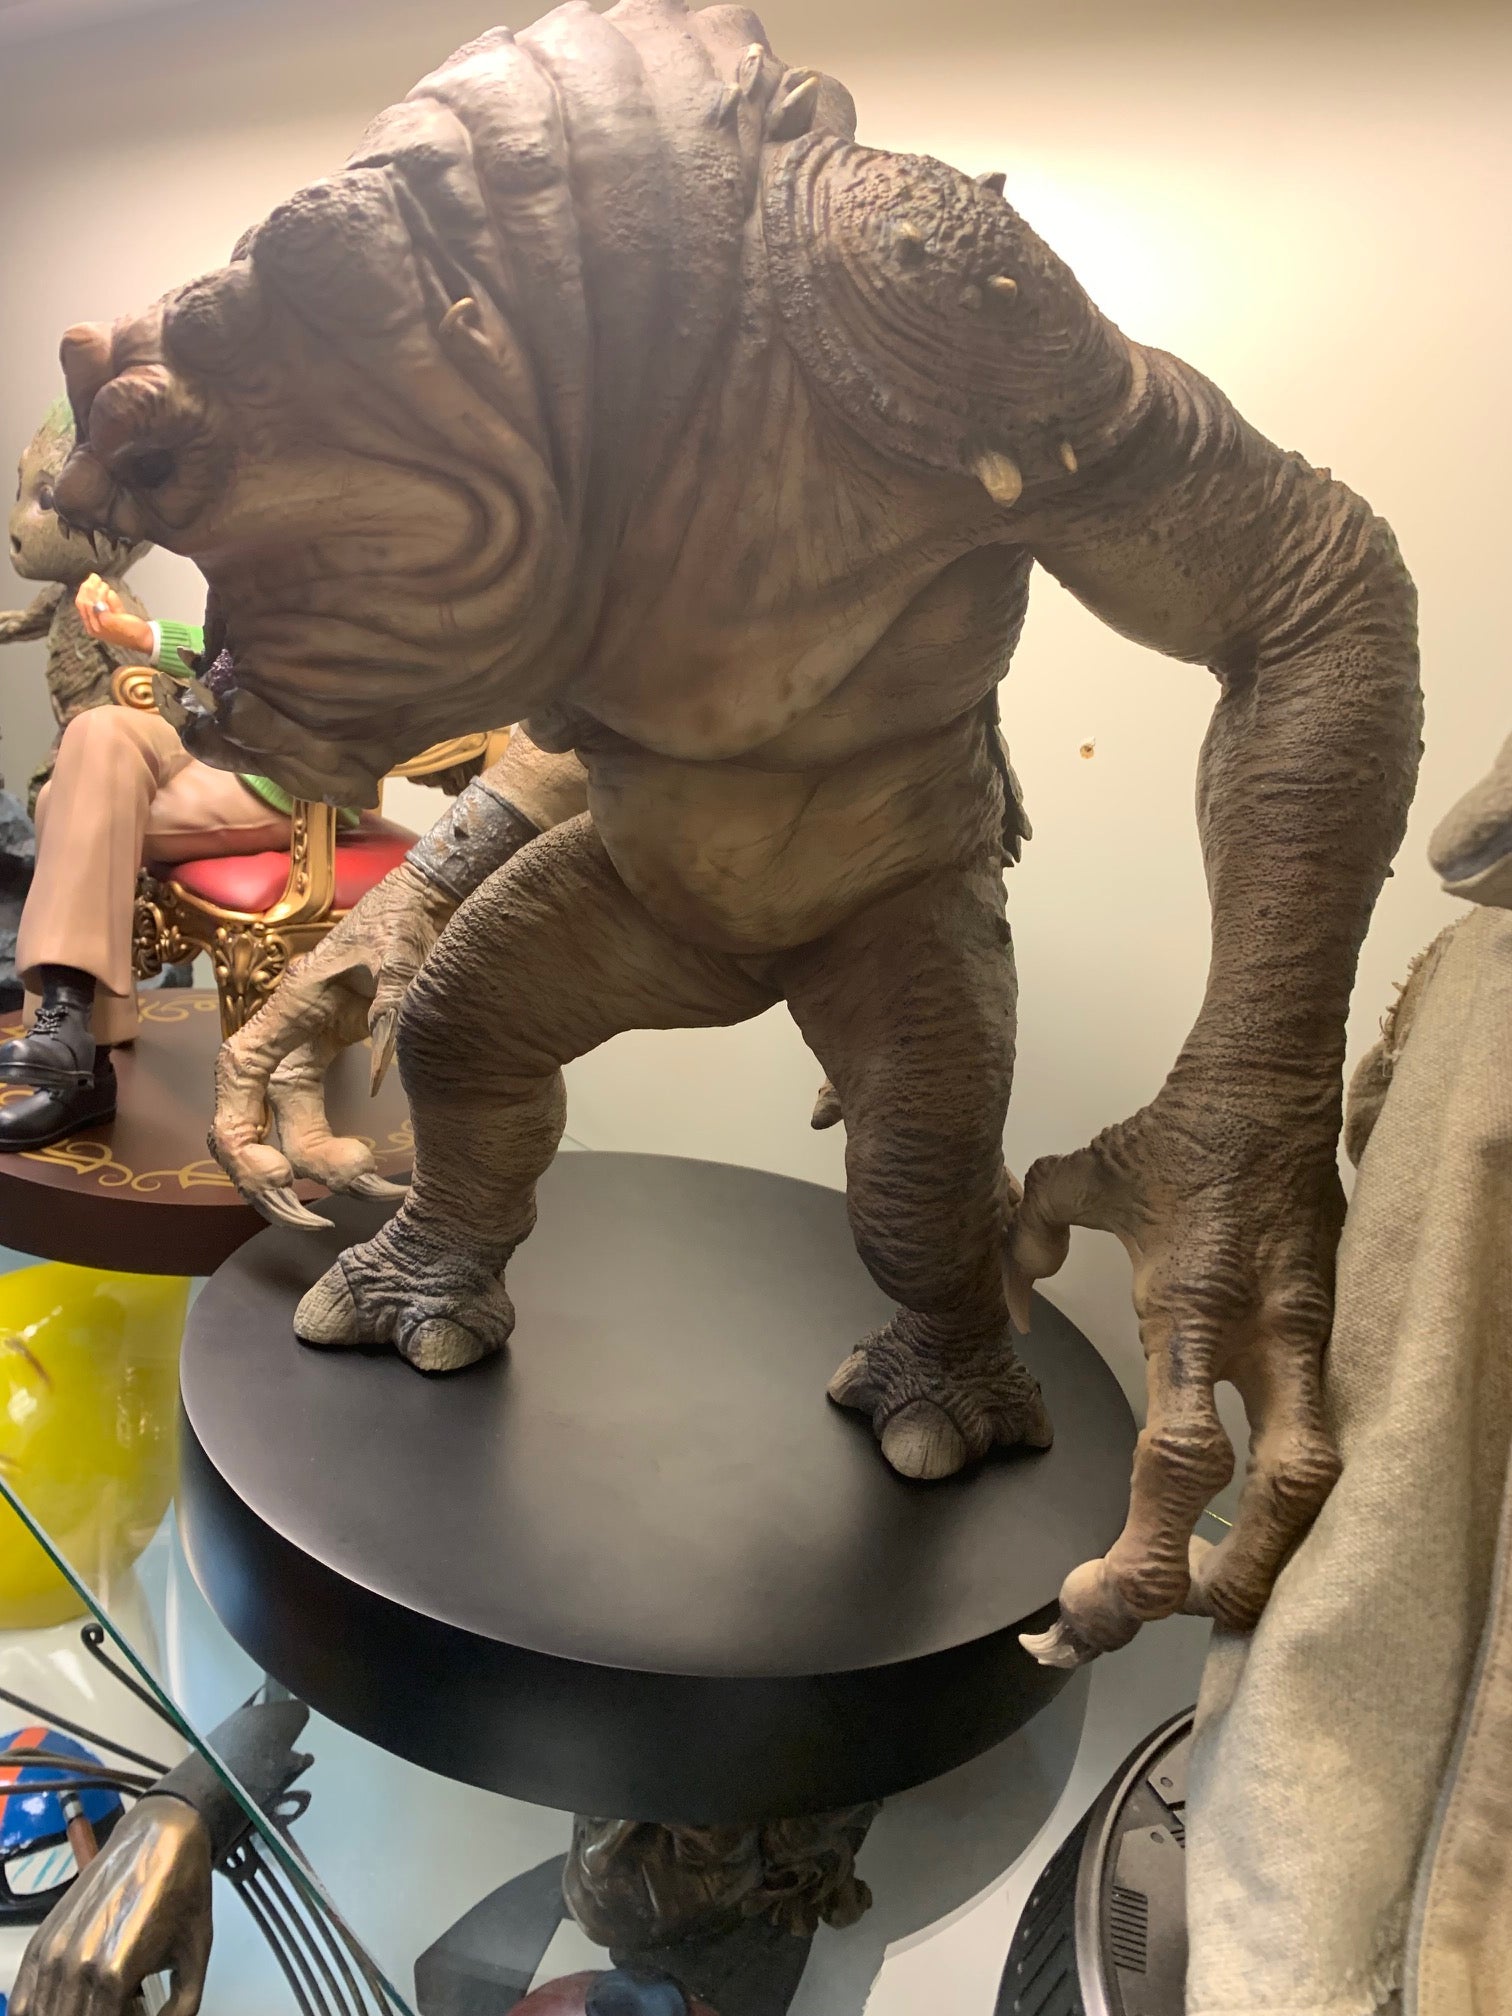 Star Wars Return of the Jedi RANCOR STATUE by Sideshow Collectibles LE 2000  - O'Smiley's Dolls & Collectibles, LLC